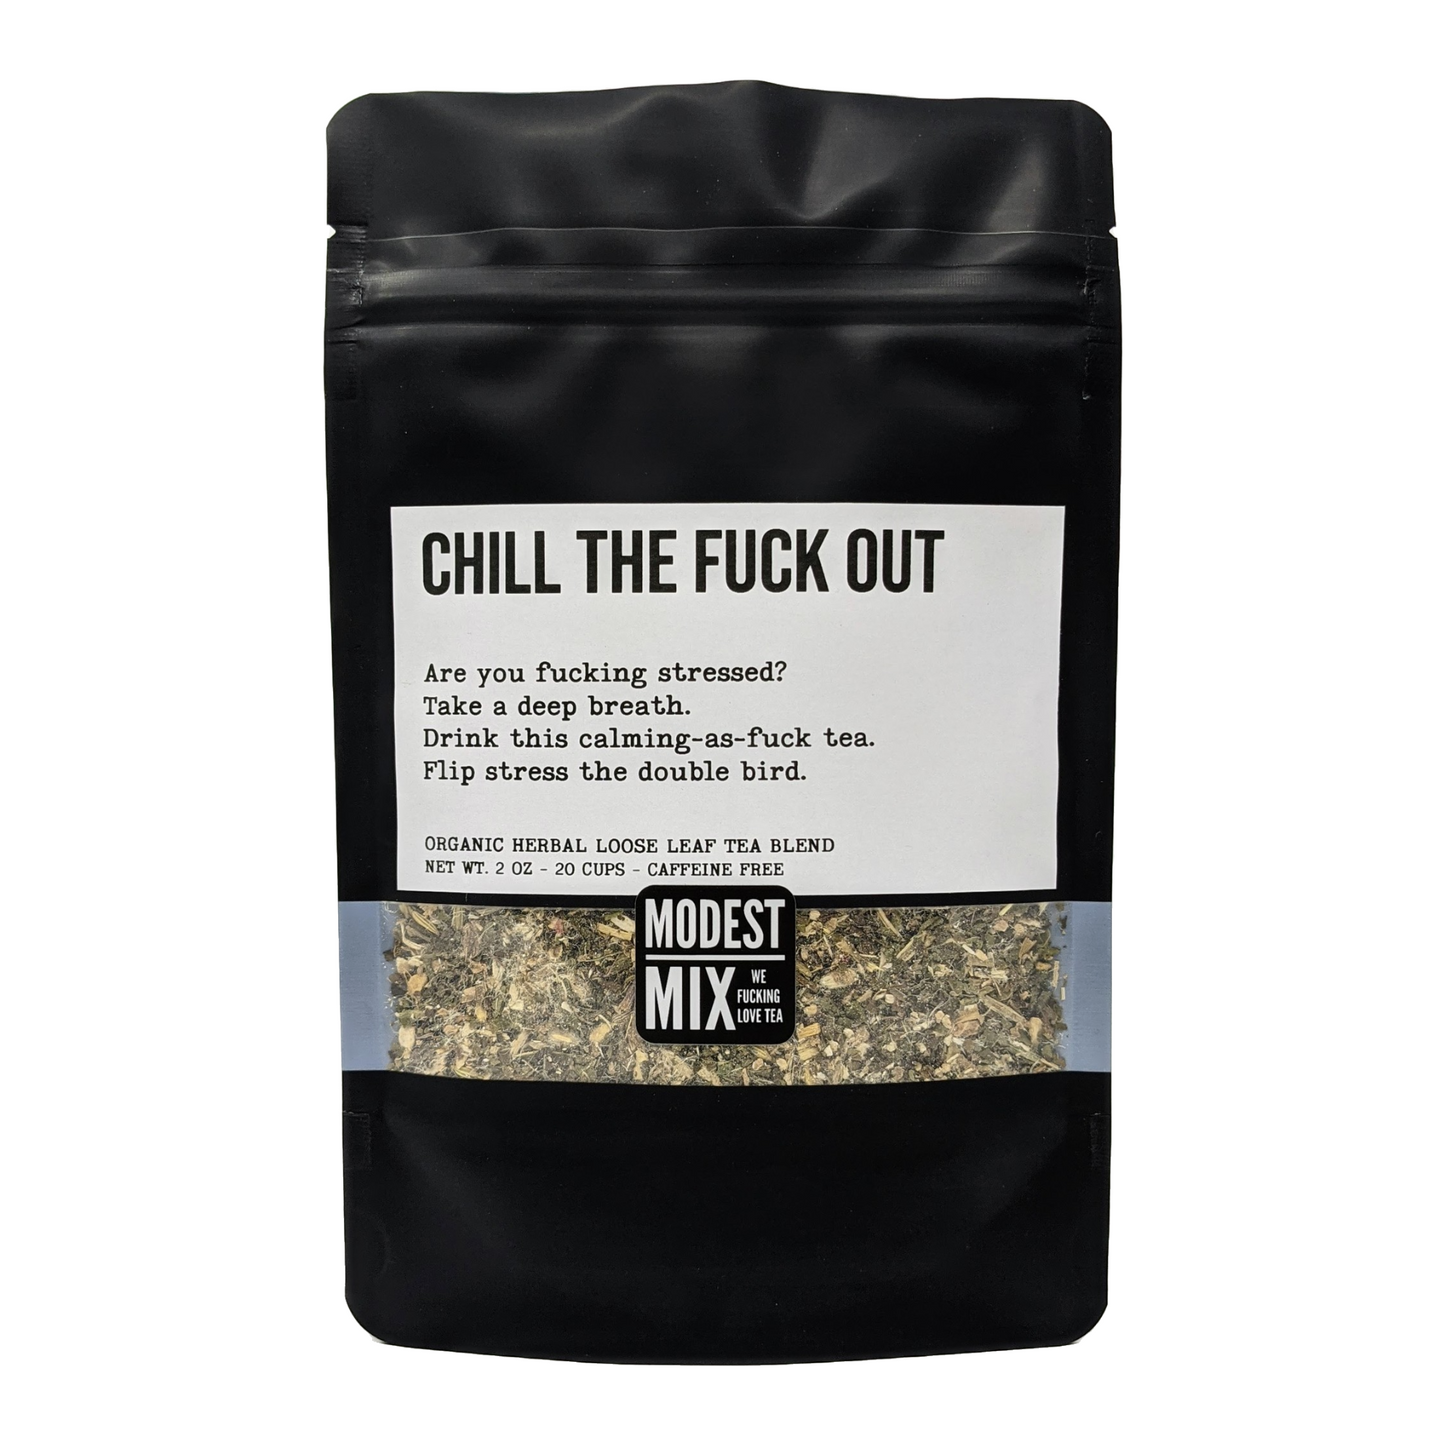 Chill The F**k Out - Spicy Herbal Mix with Mint, Ginseng & Ginger by ModestMix Teas